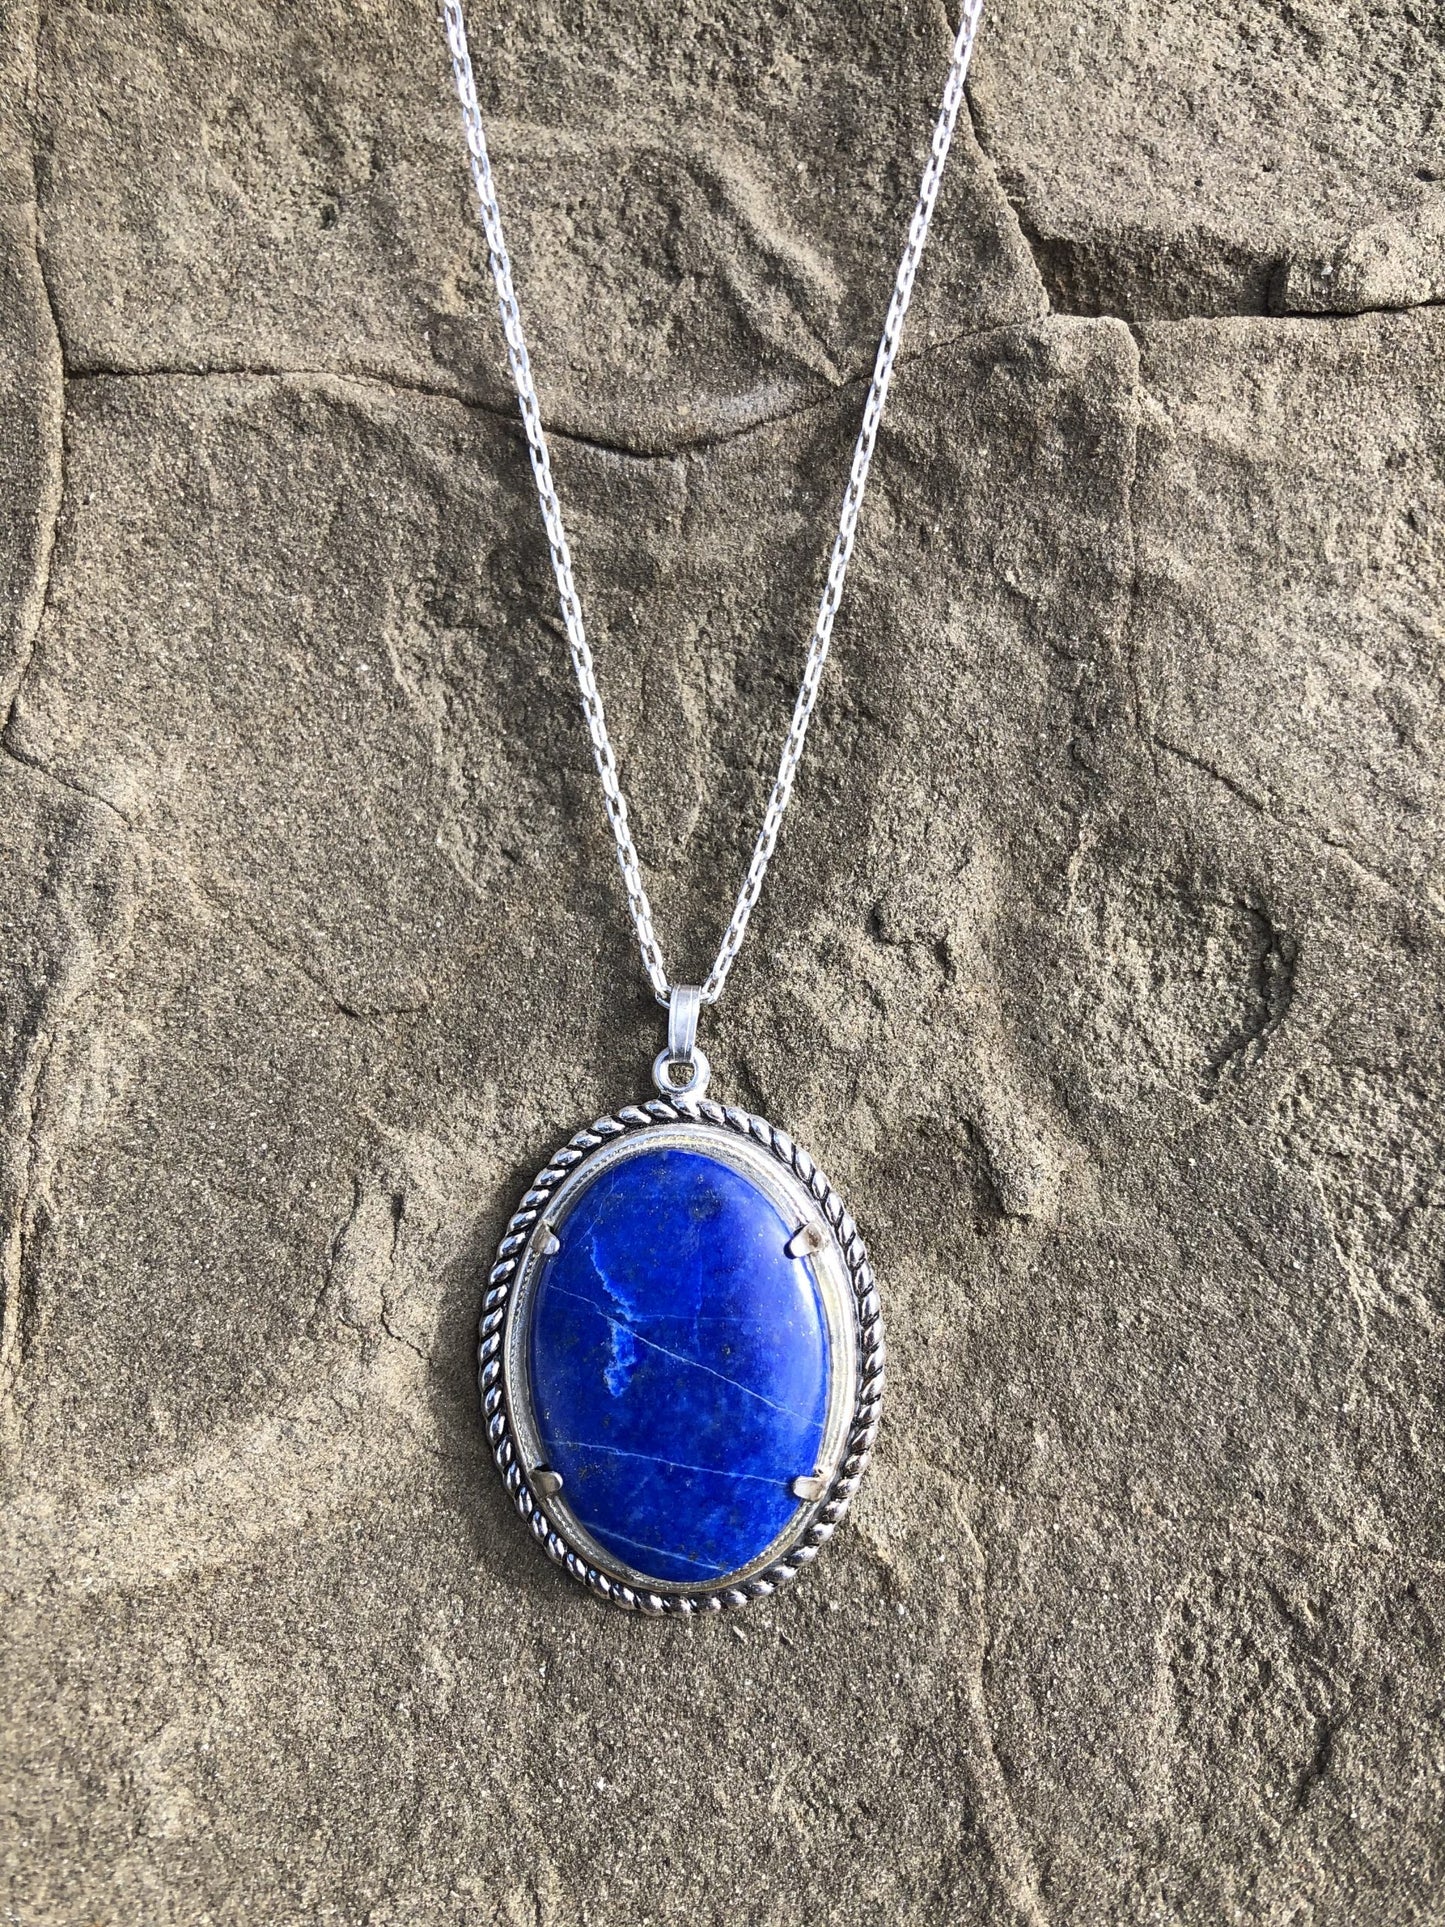 Necklace with rich blue lapis lazuli, hand cut to a 30x20mm cabochon and set in silver plated setting with 19 inch chain.